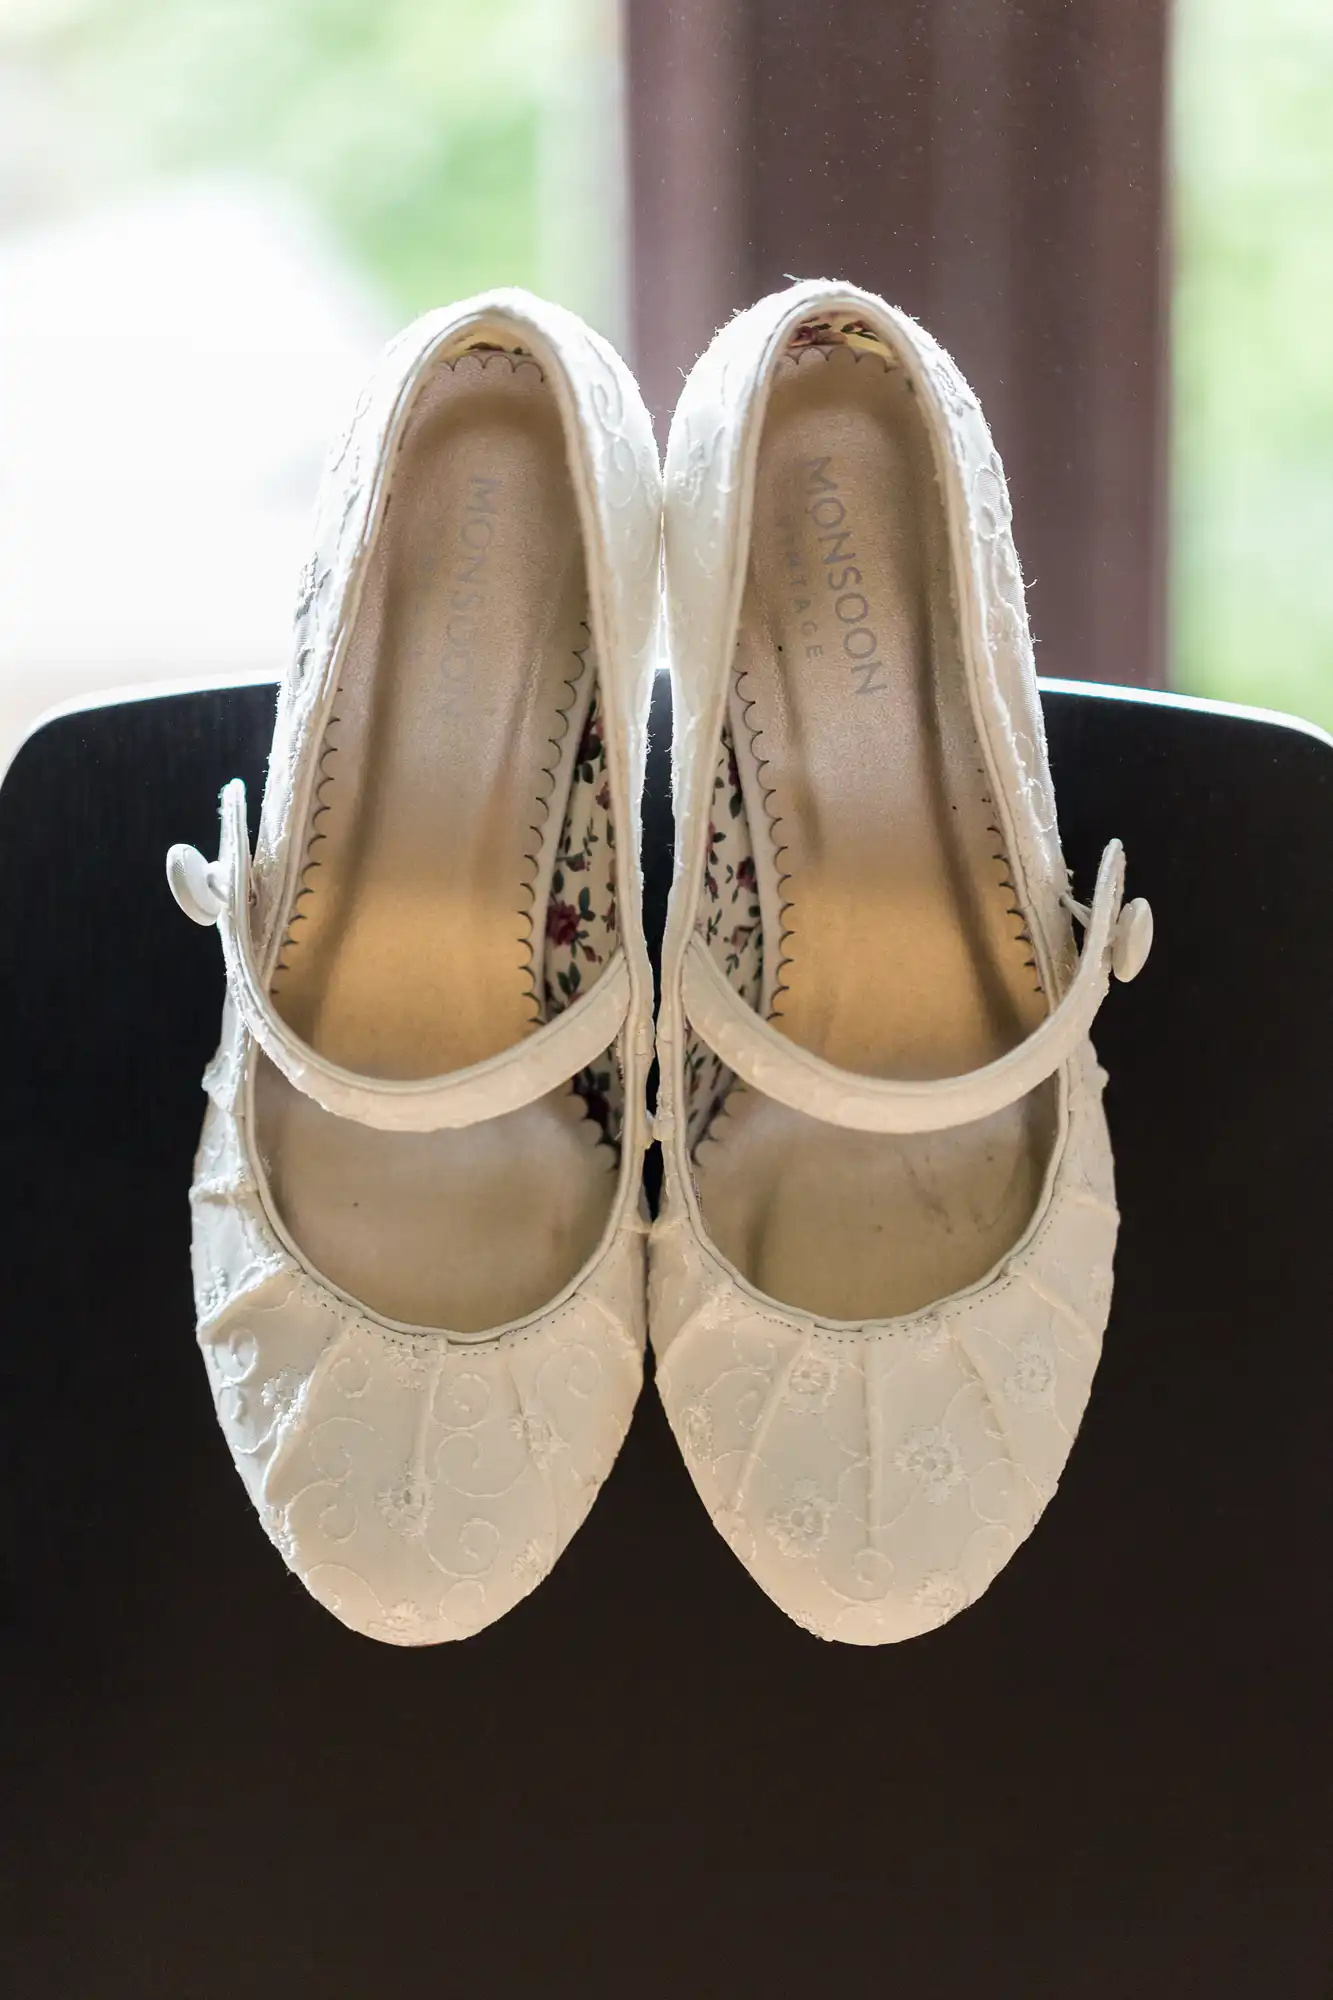 A pair of white, lace monsoon ballet flats positioned on a dark surface with a natural light background.